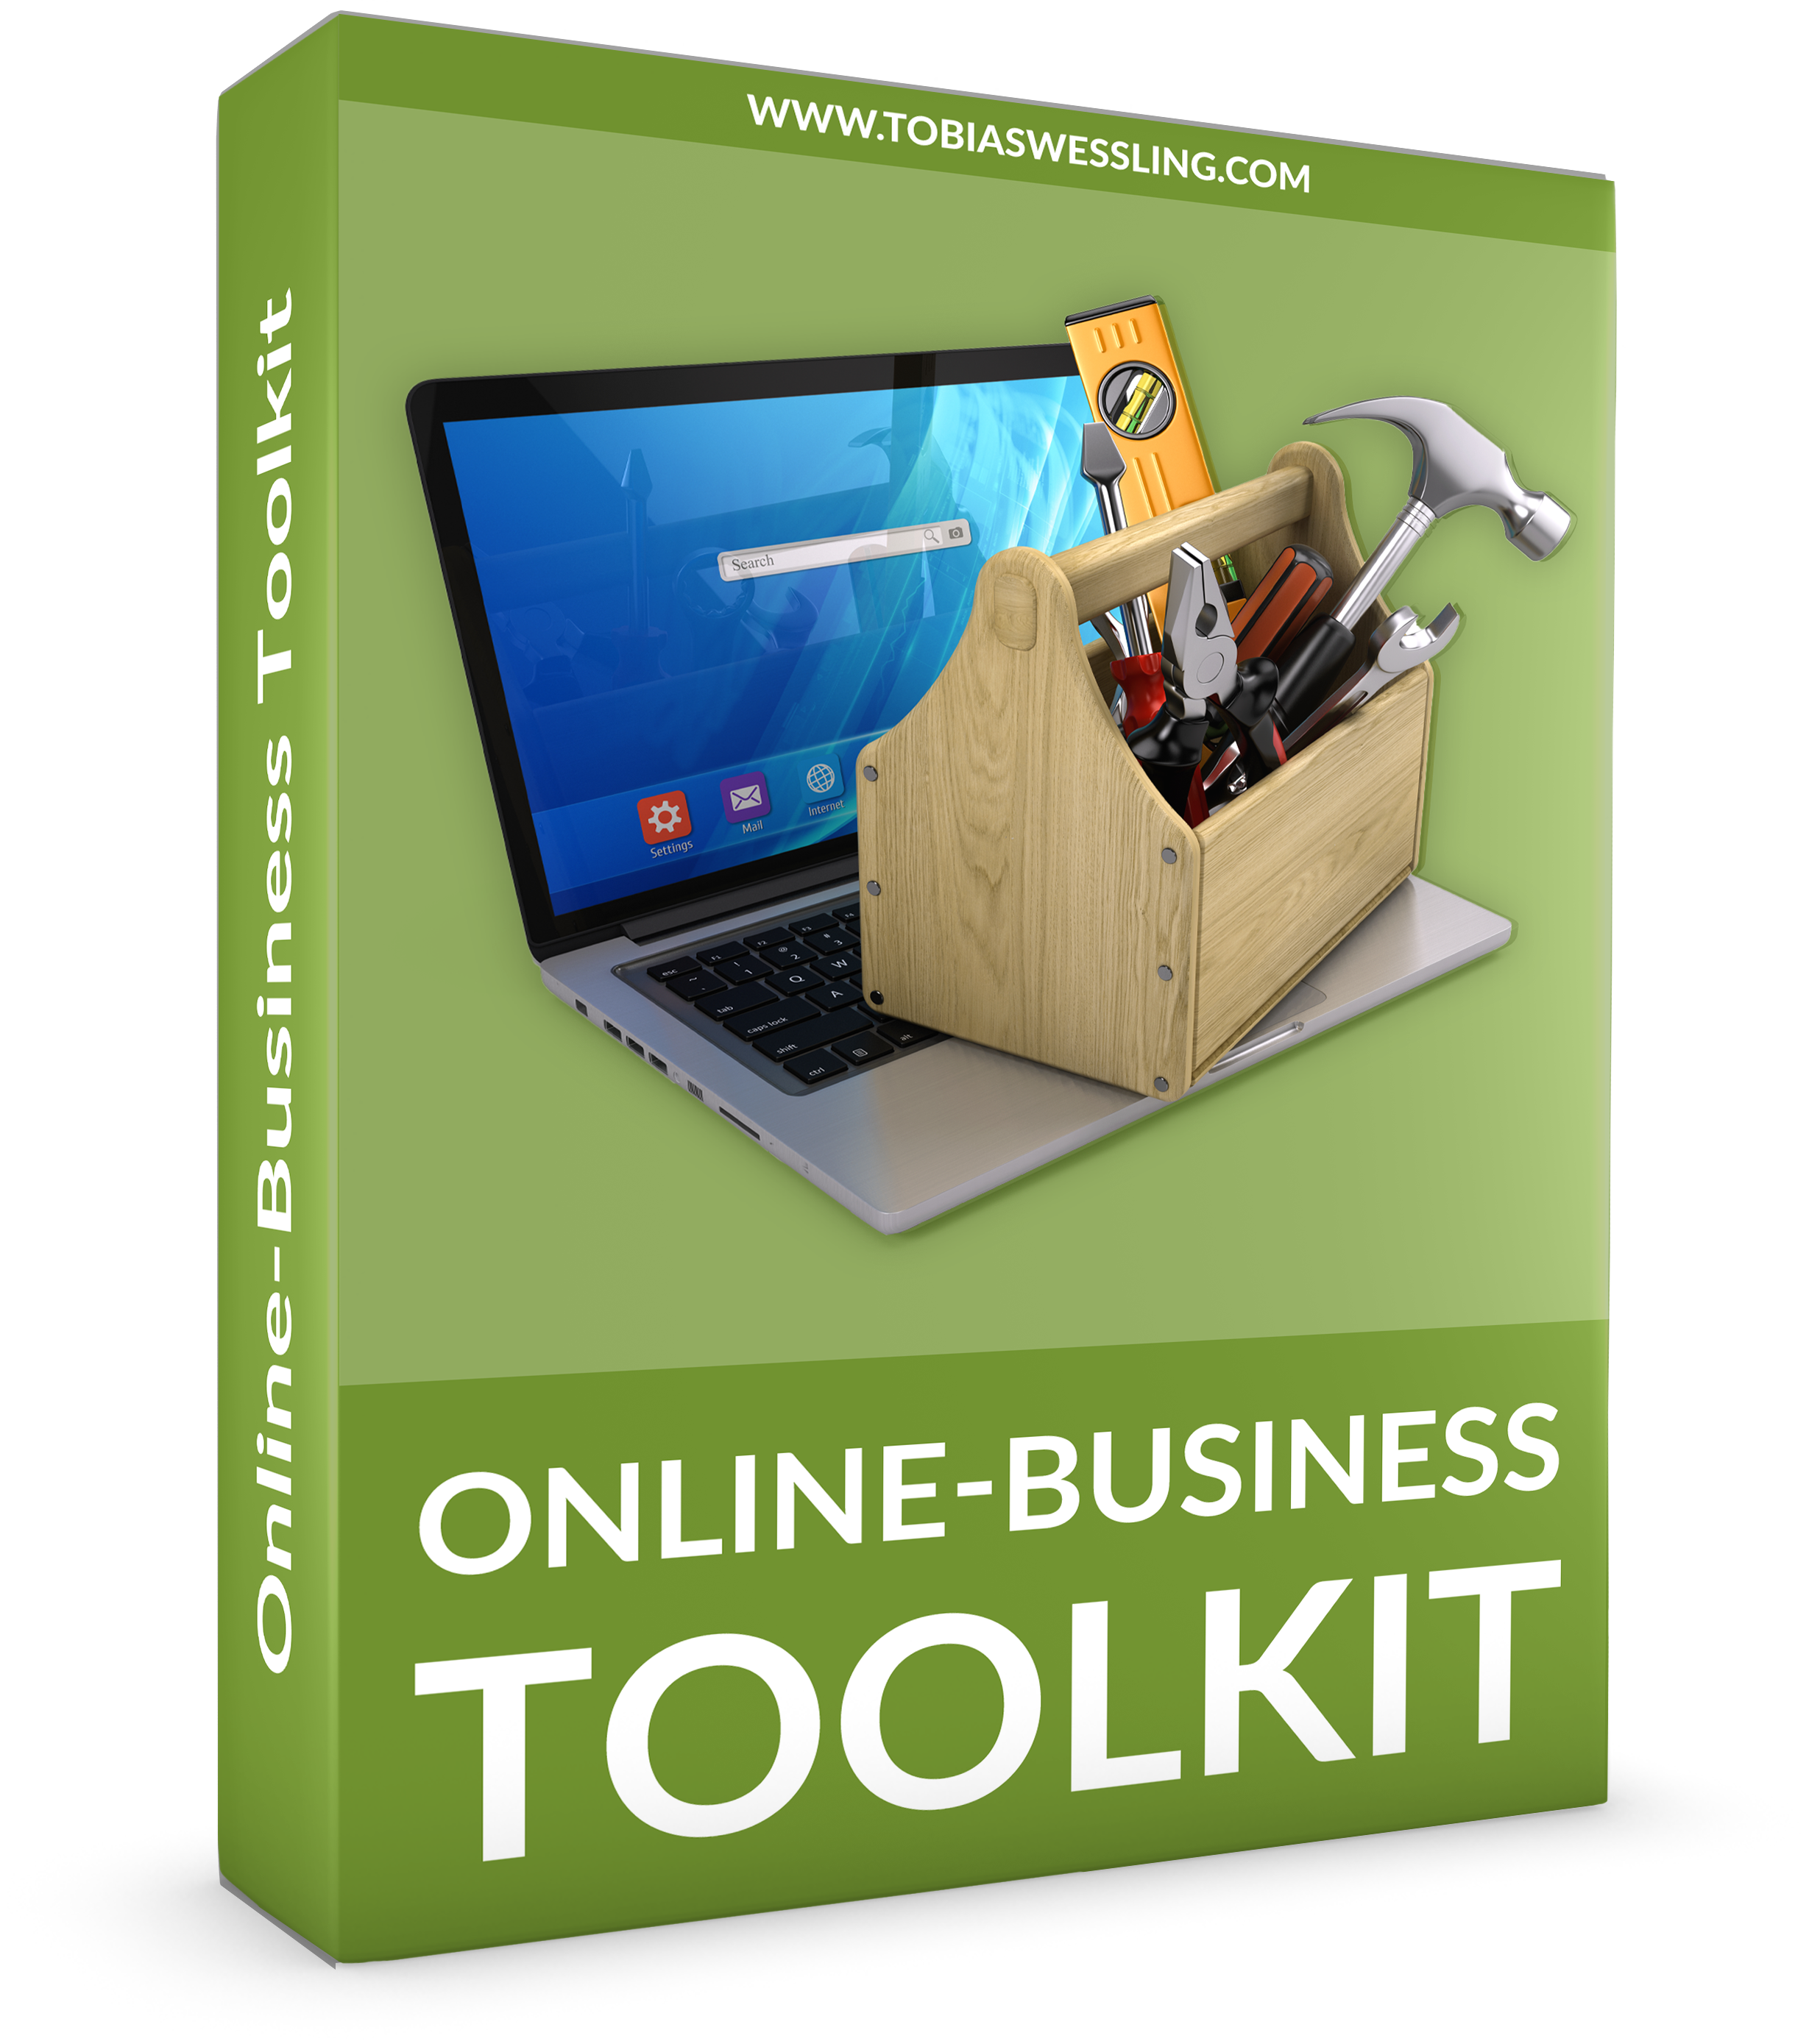 Online-Business Toolkit